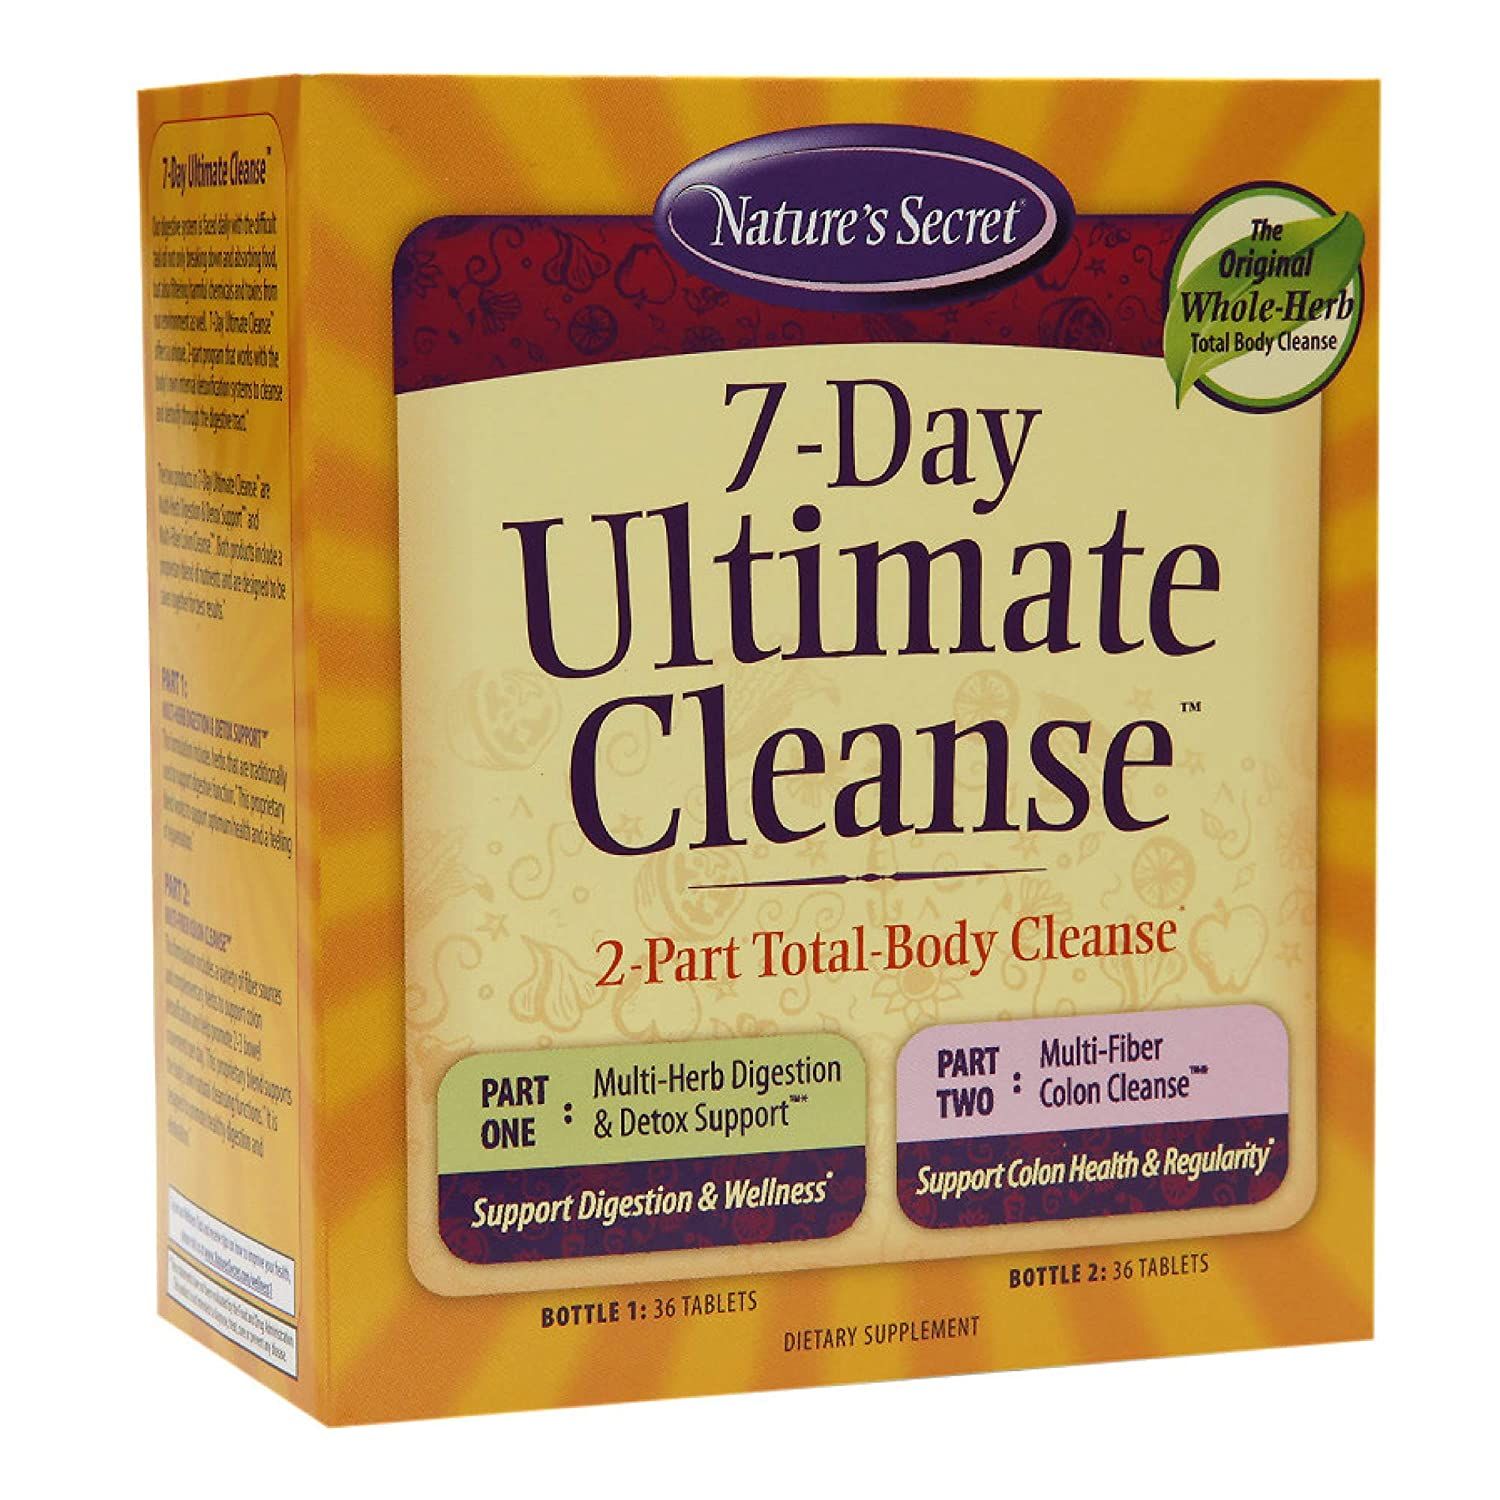 Nature's Secret 7 Day Ultimate Cleanser Image